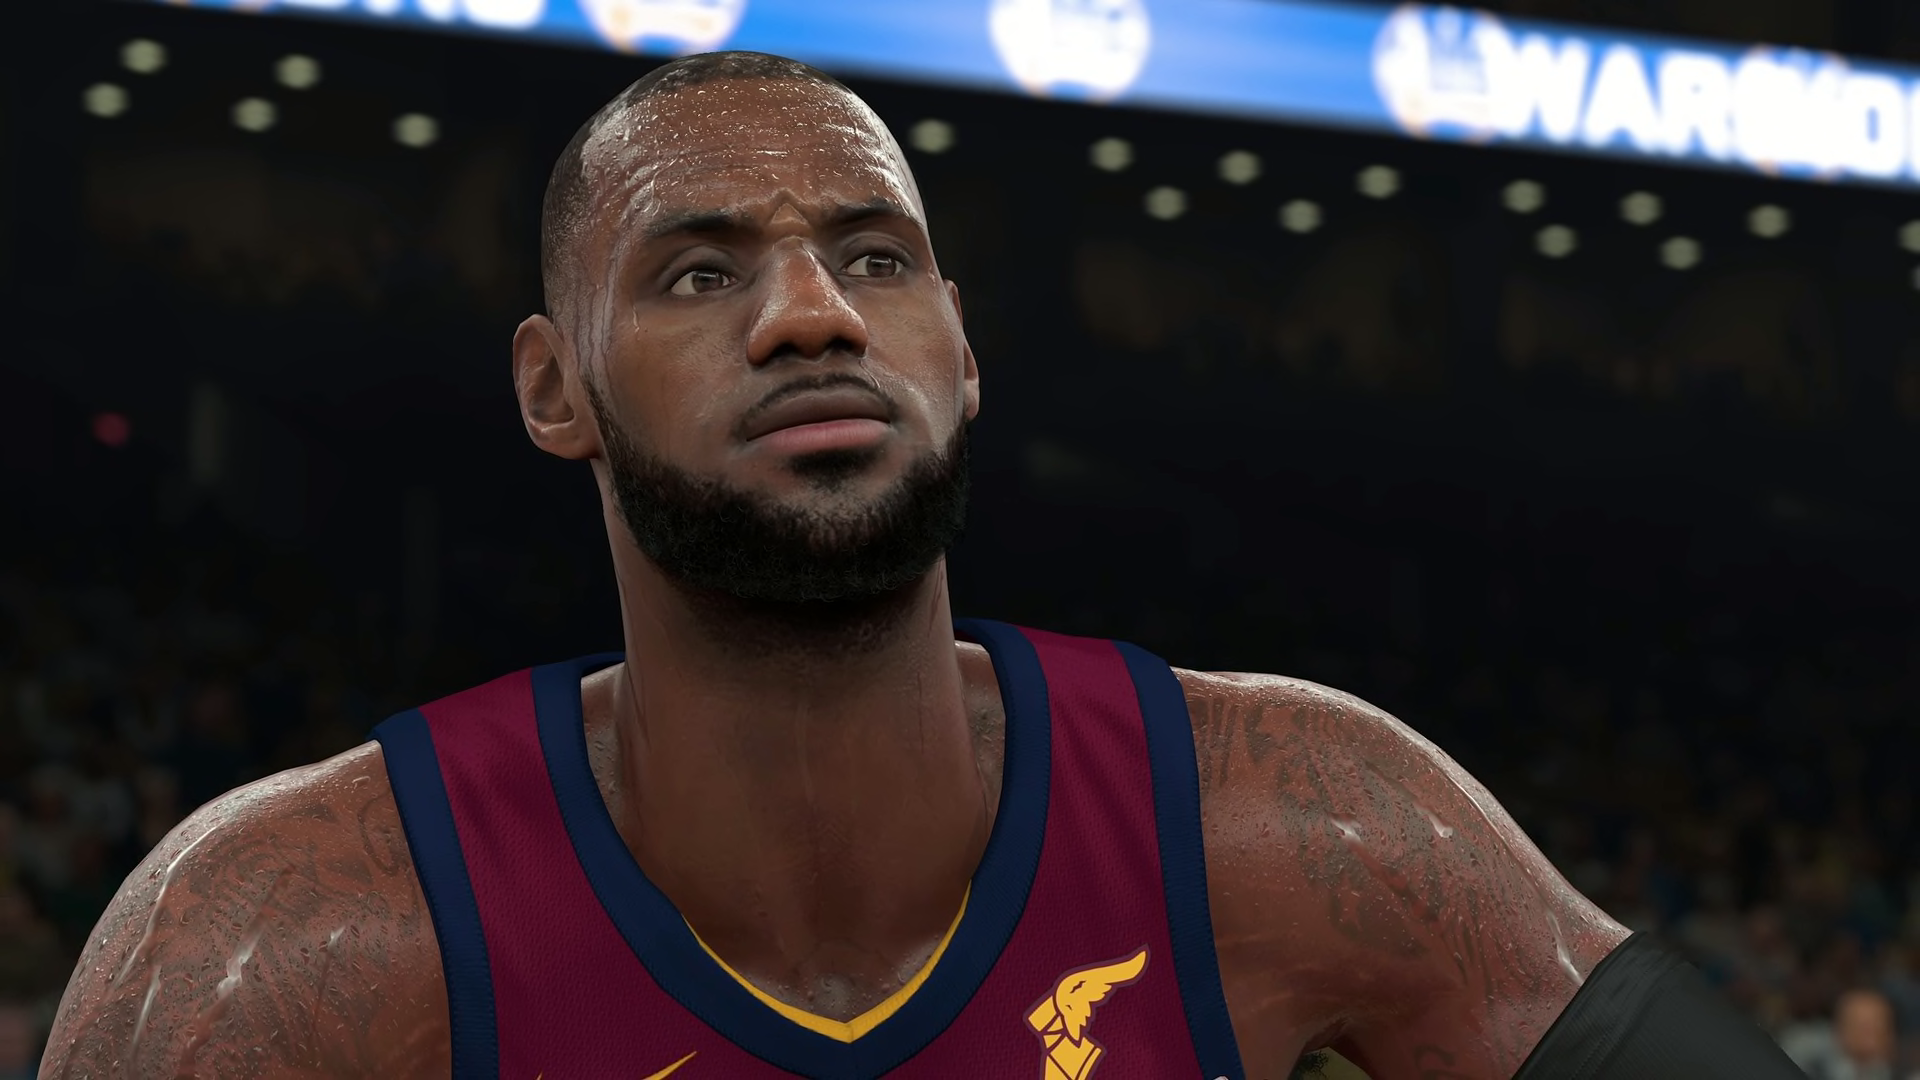 The Art Behind Nba 2k18 Weirdly Chooses To Showcase Uh Stretch Marks